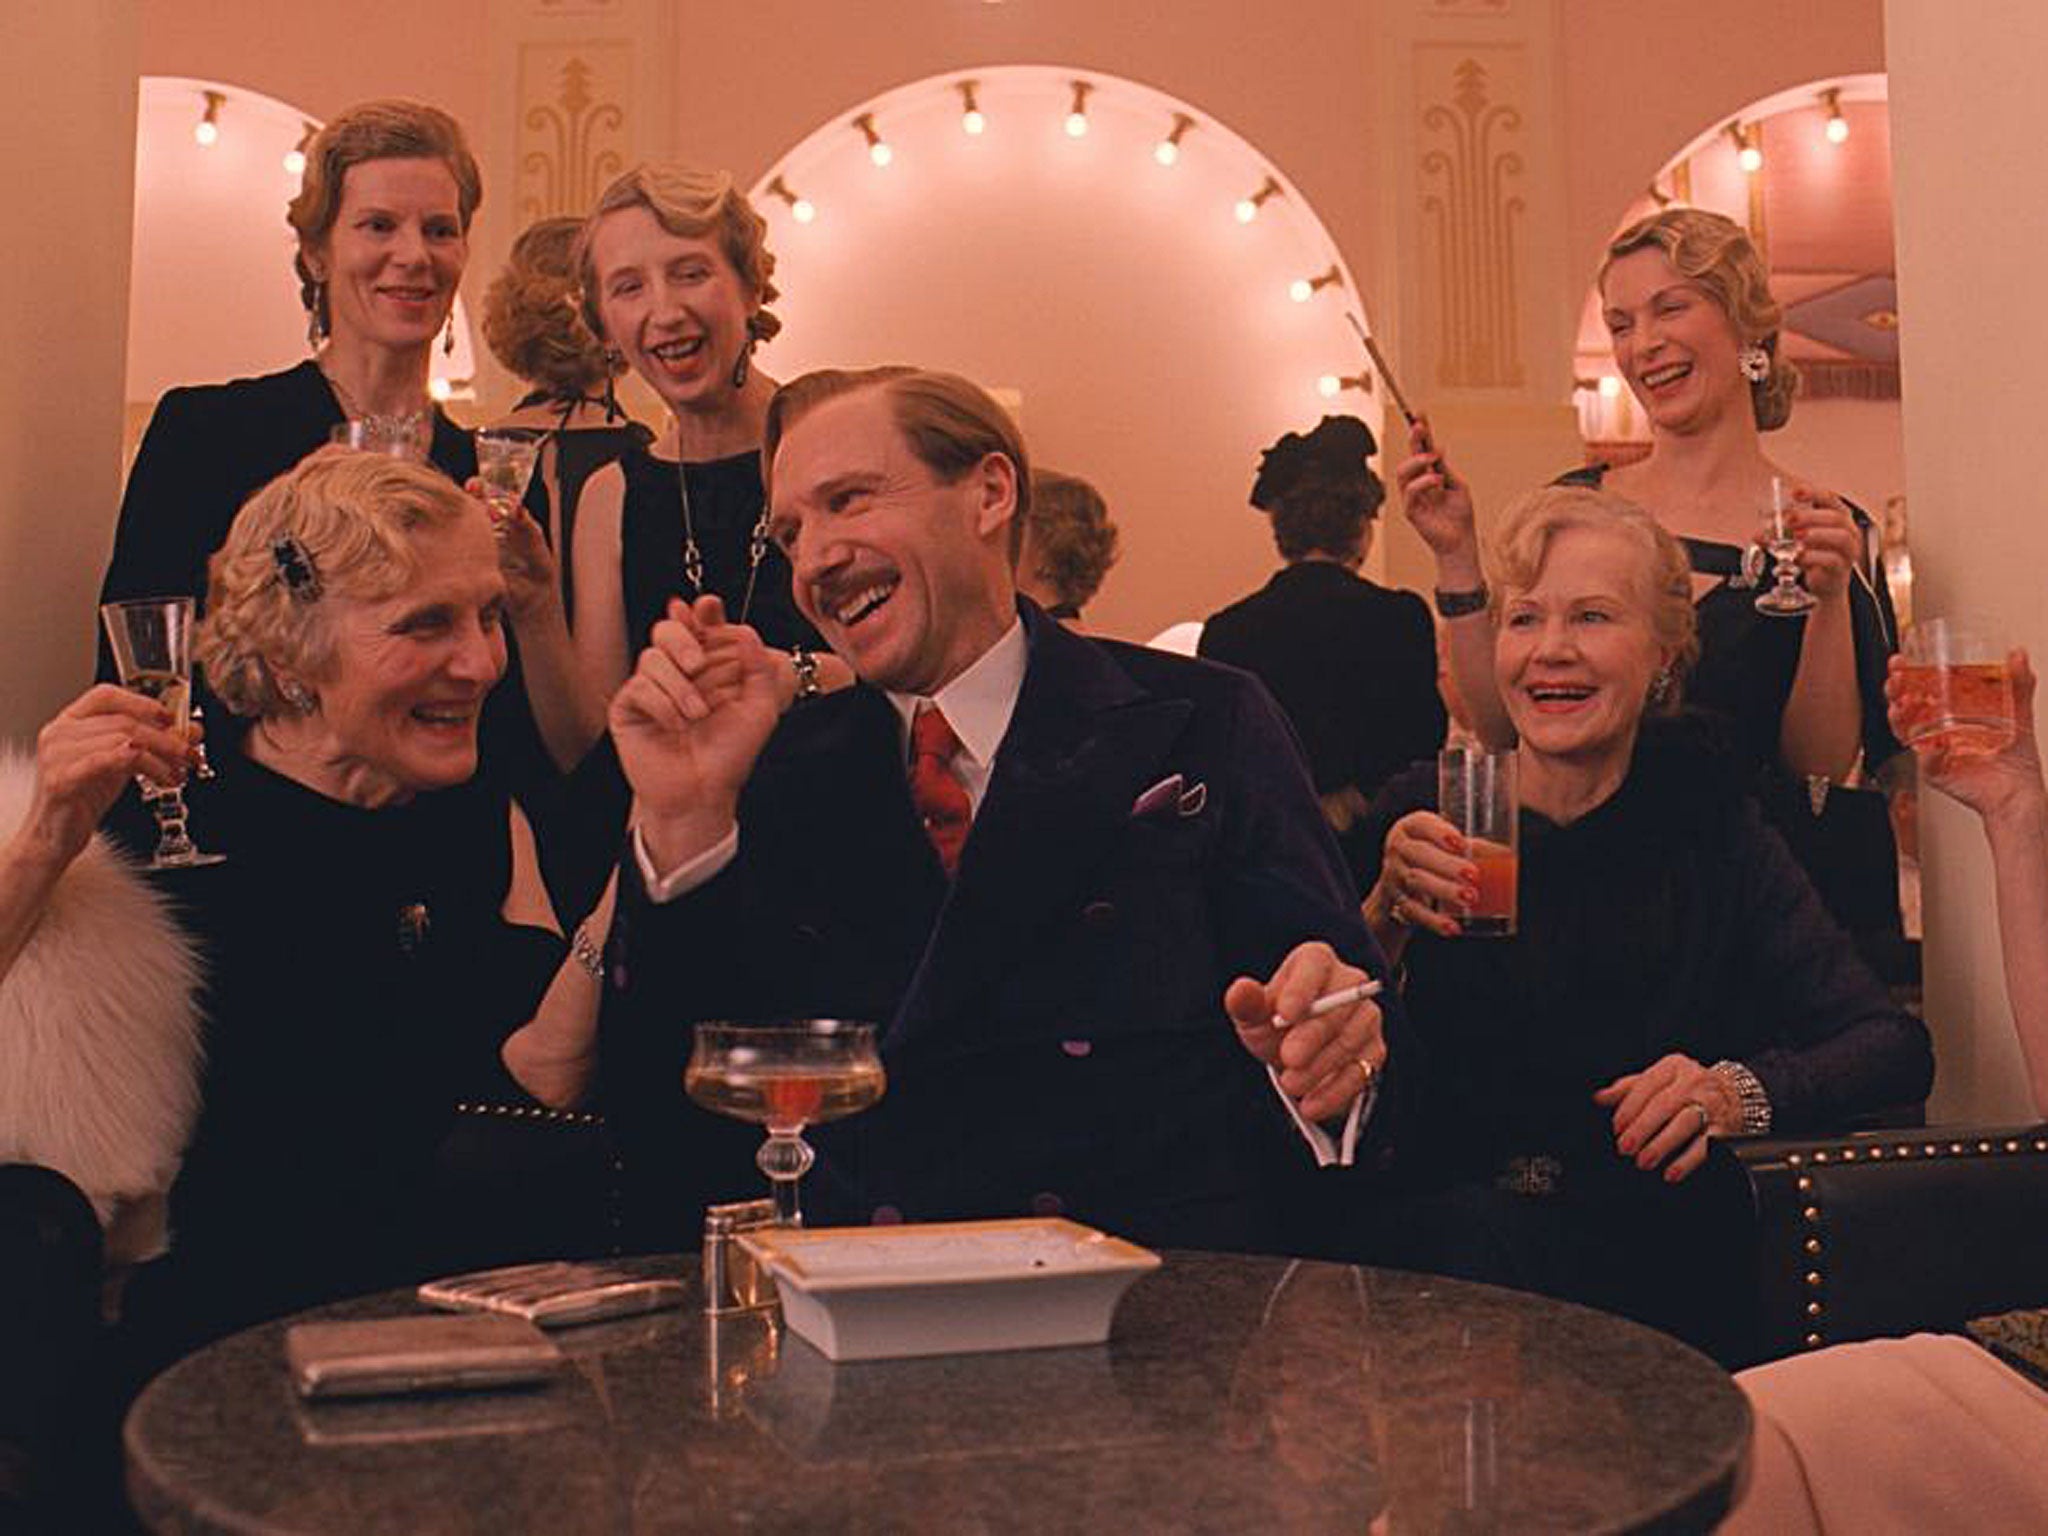 Check in to ‘The Grand Budapest Hotel’ with a special TV deal